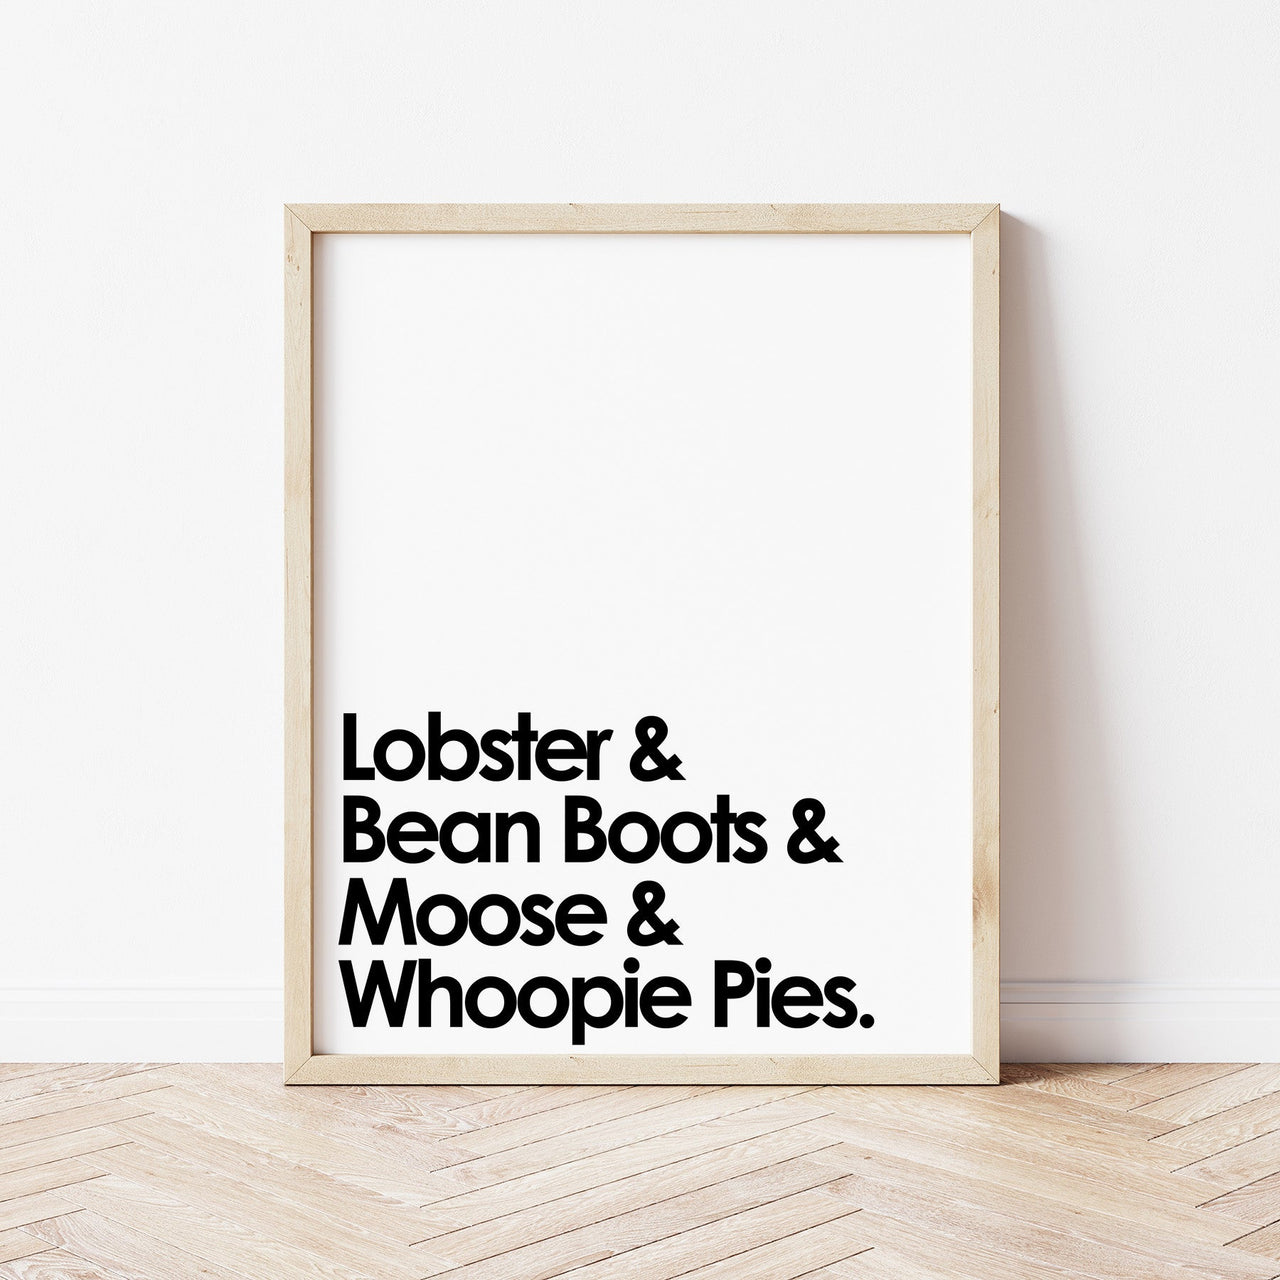 Lobster, Bean Boots, Moose, & Whoopie Pies Print - SECOND QUALITY